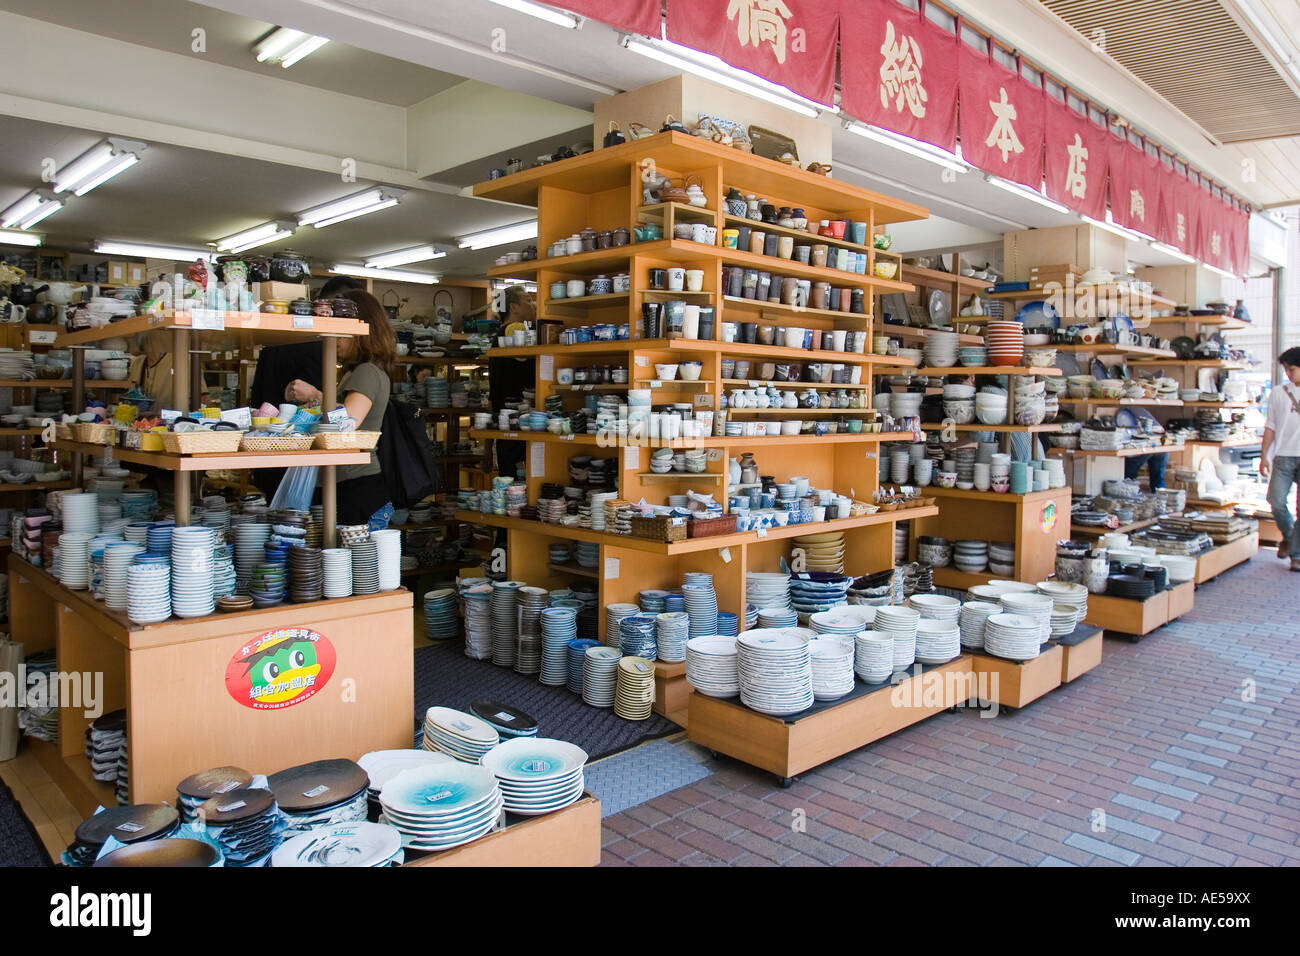 Front of a pottery store selling ceramic plates bowls cups and other tableware Stock Photo